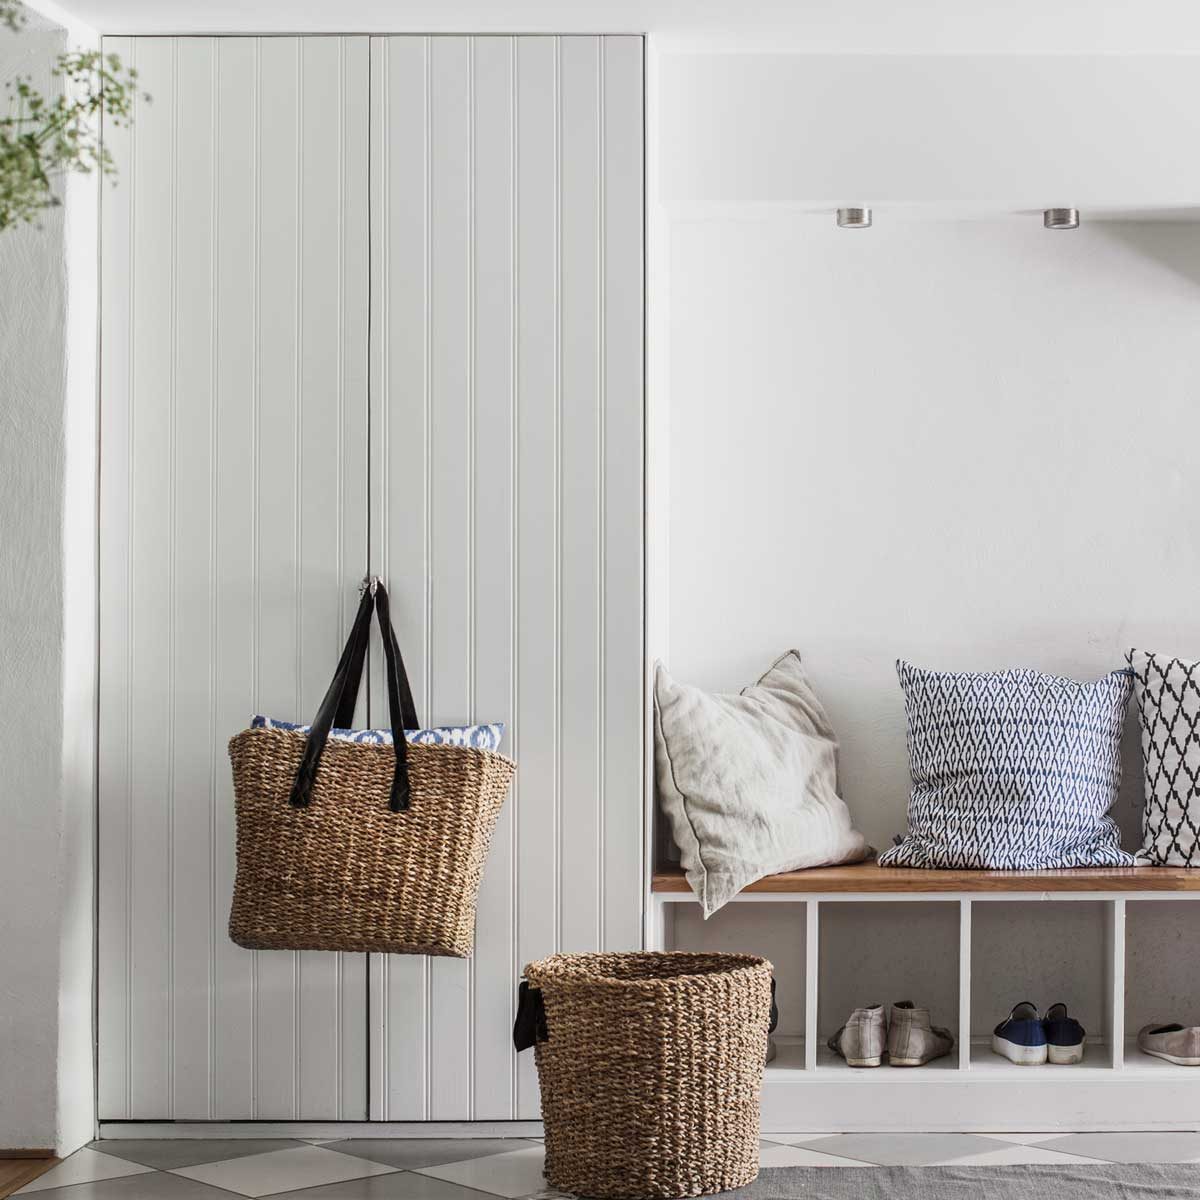 How to Organize a Small Foyer Closet